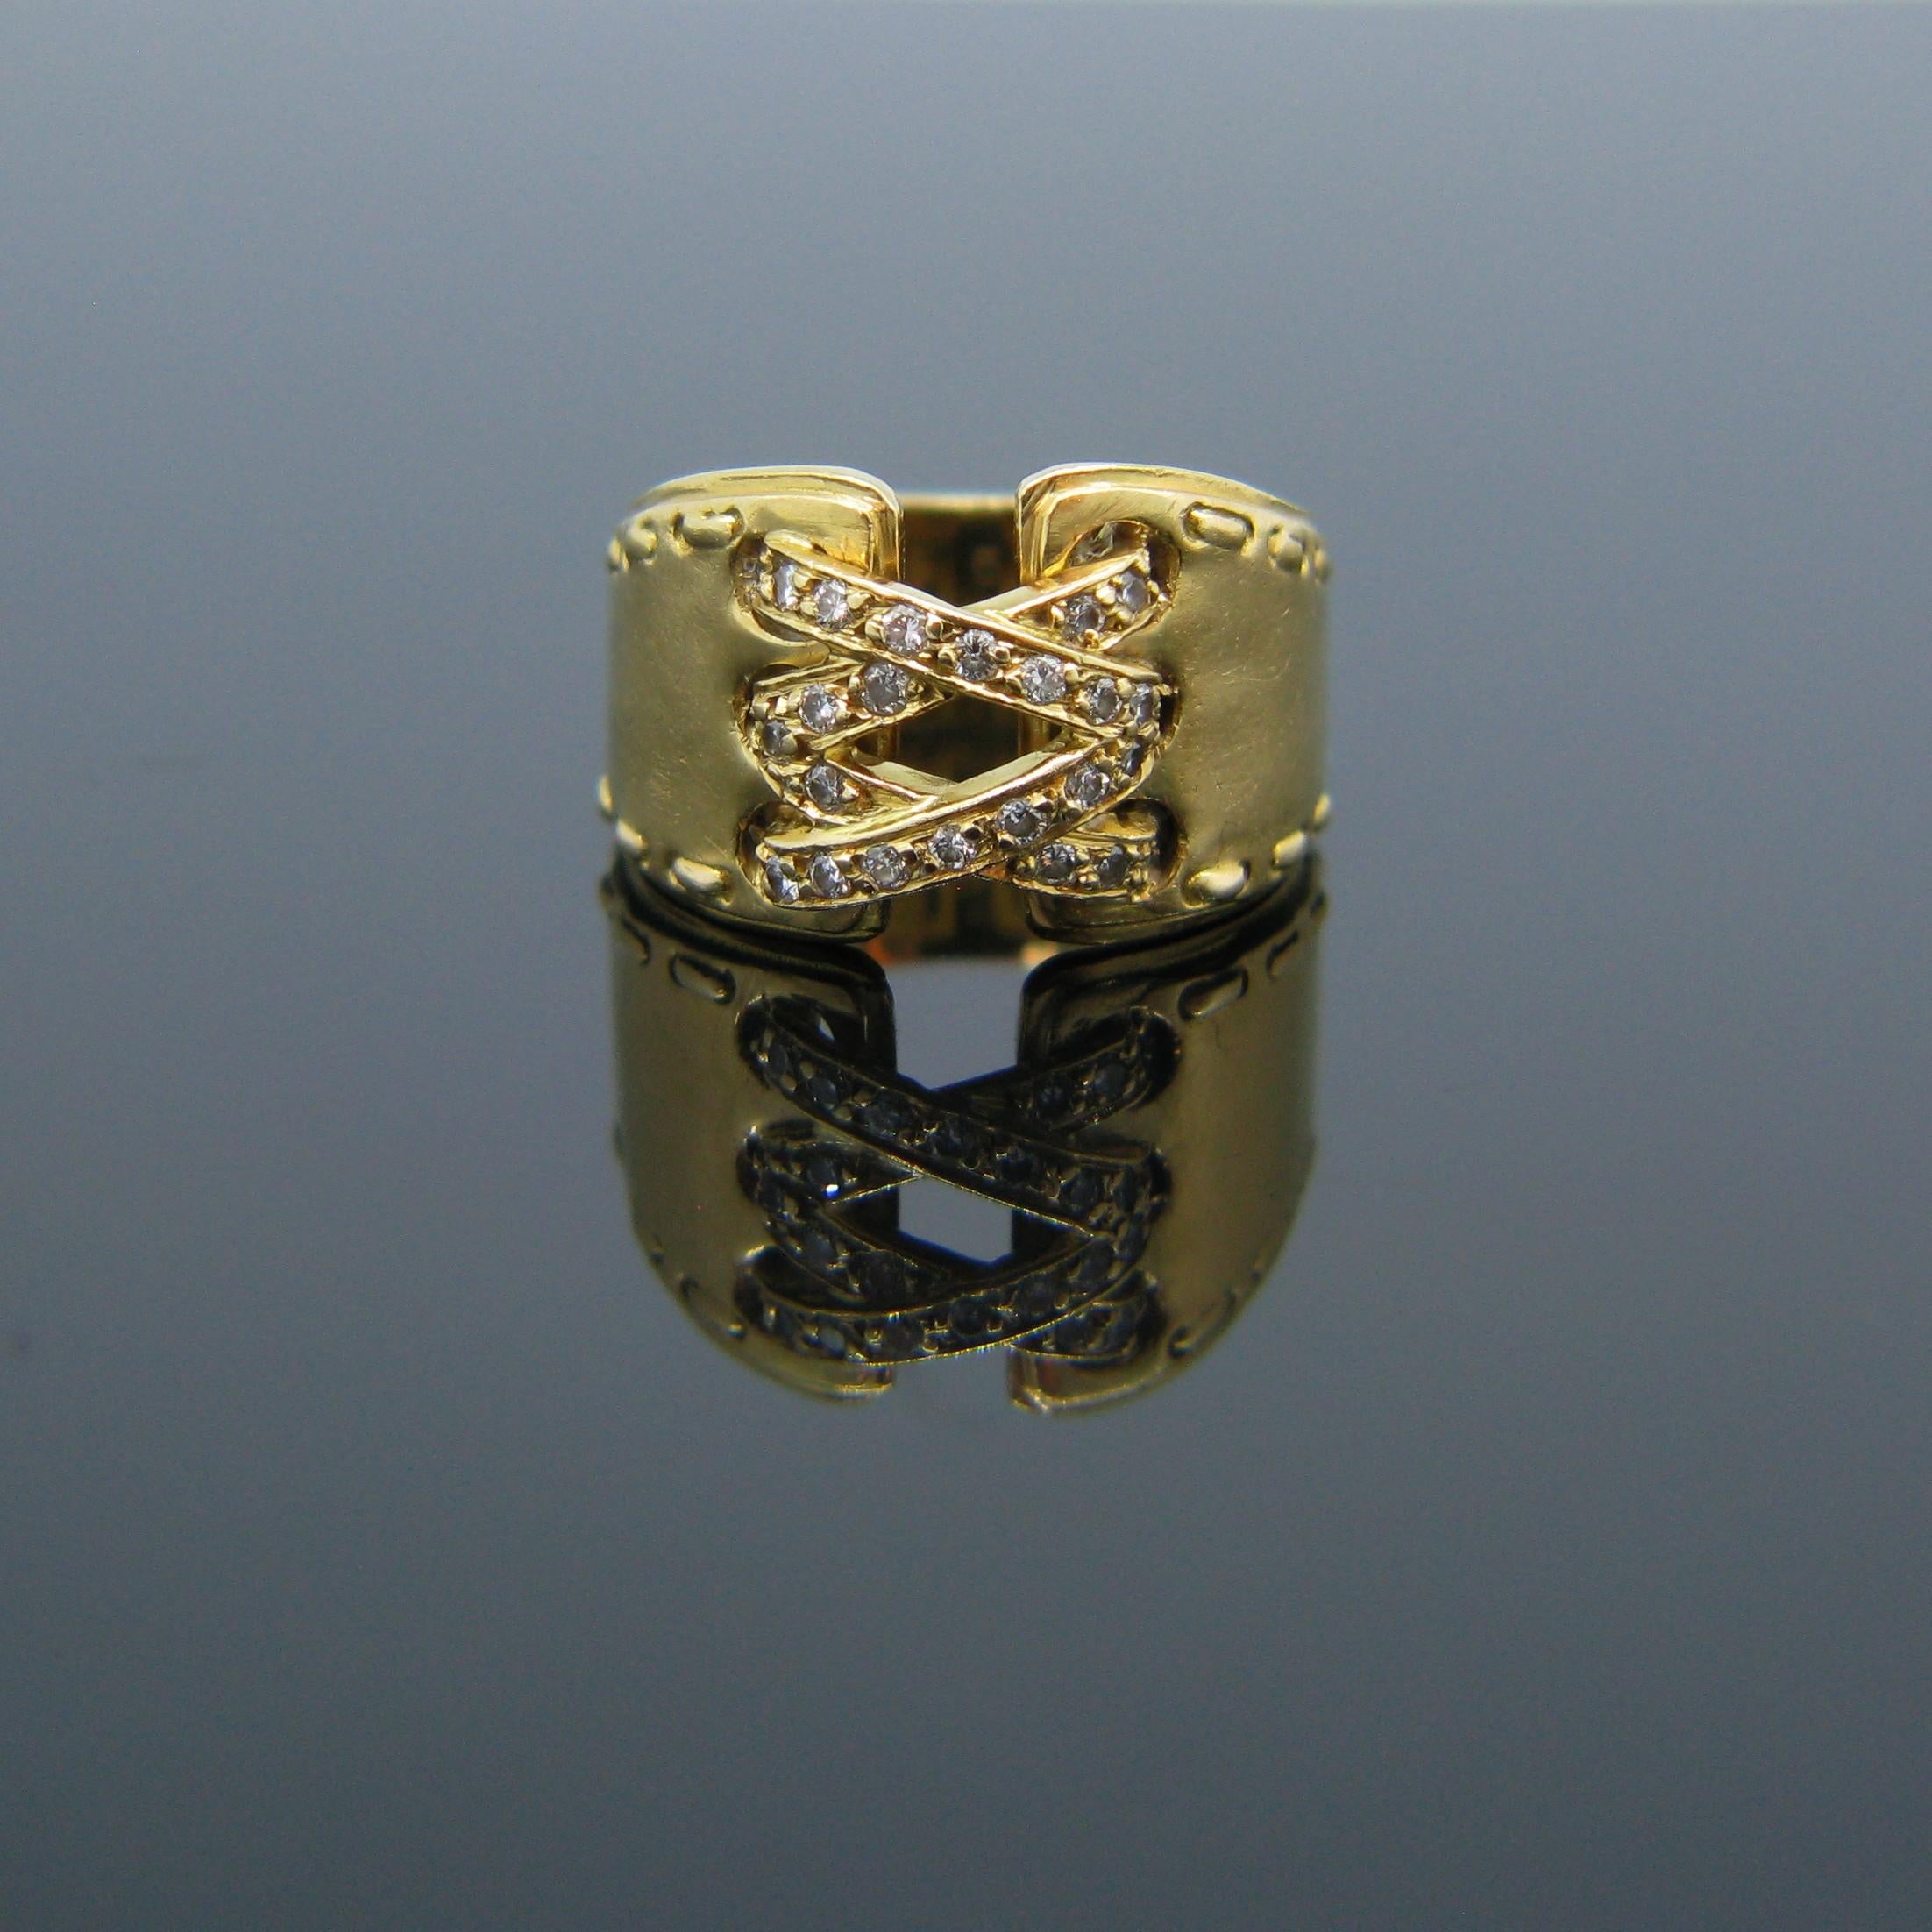 This ring is signed by the famous designer house Hermes. It is called the corset ring and is made in 18kt yellow gold. This vintage ring features a stitch design on the both sides of the band. It is set with 28 round cut diamonds with a total carat